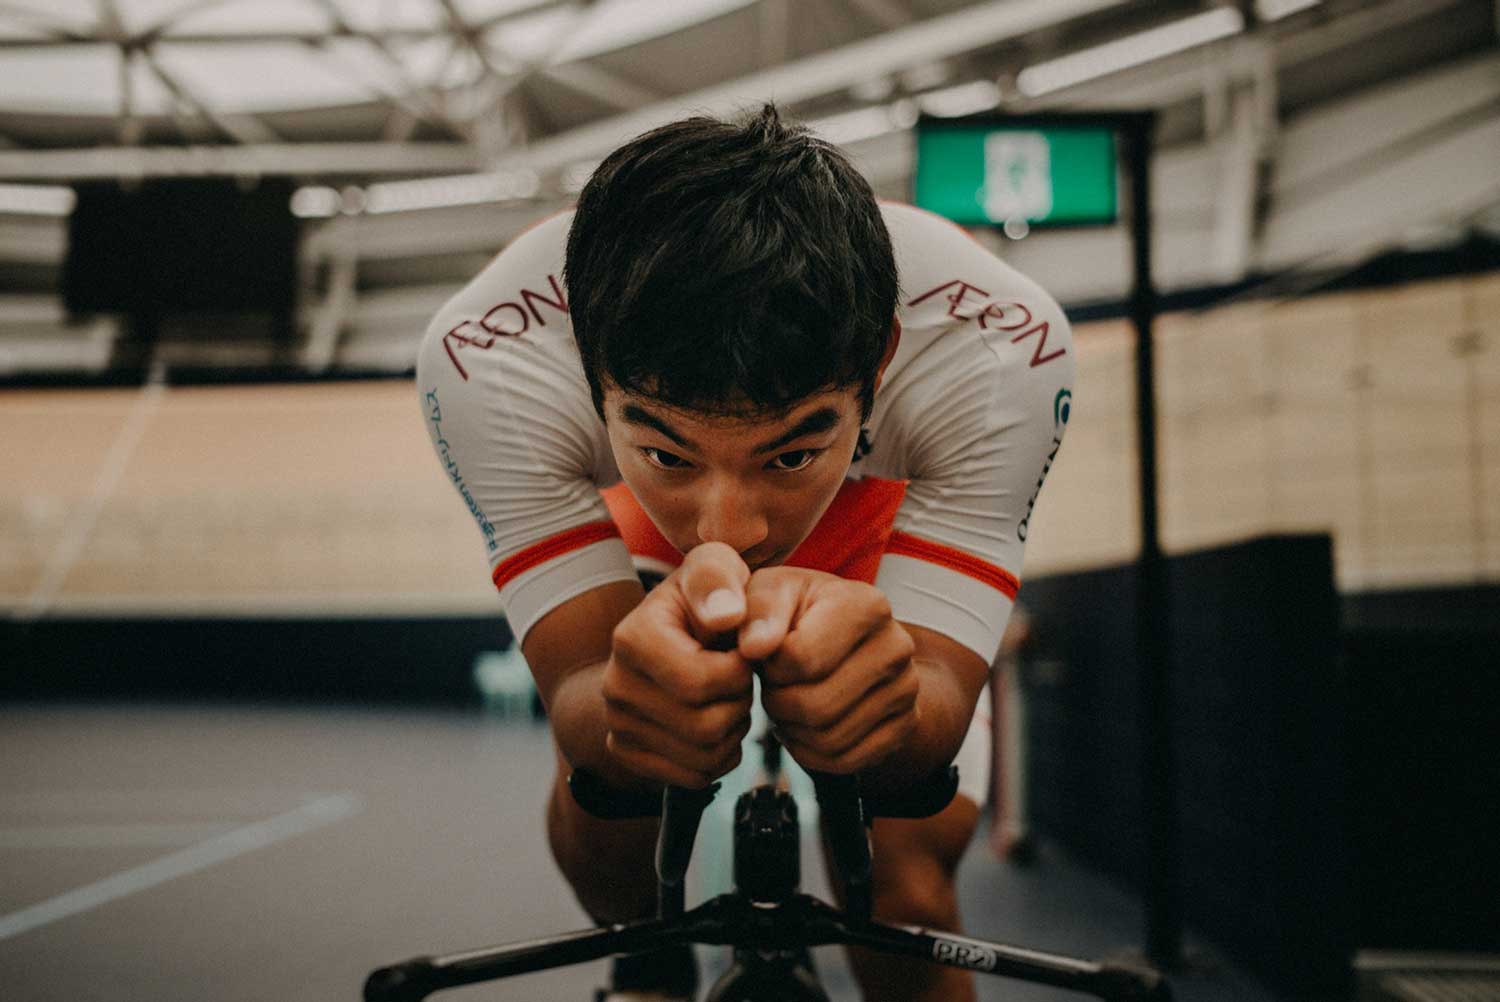 Japanese cyclist trains on aerobars of staic bike in velodrome during training session